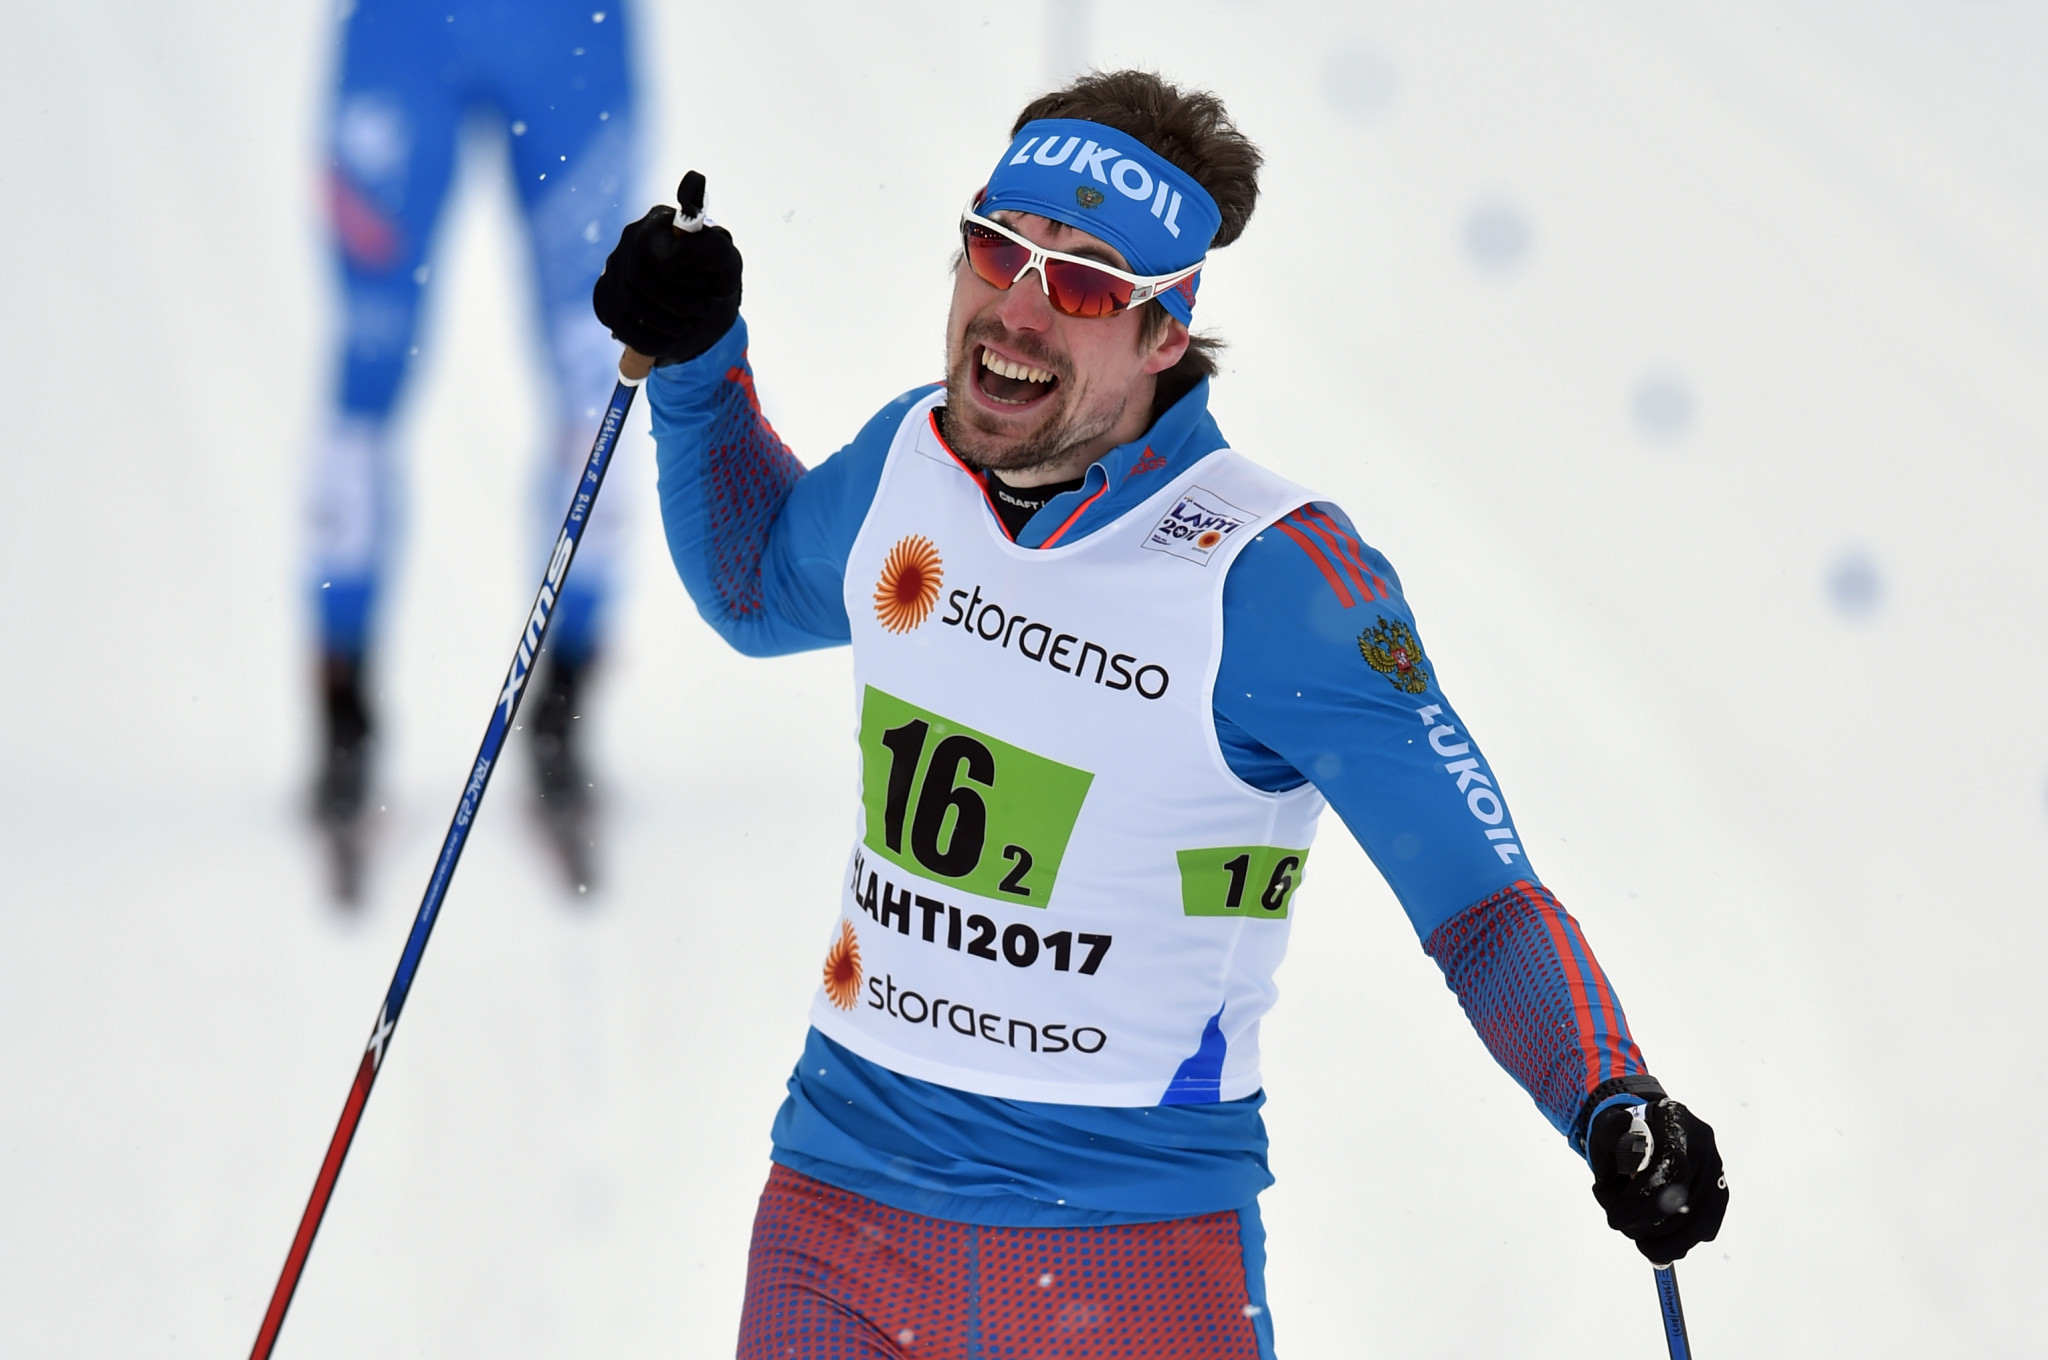 Ustyugov avoids significant injury in pre-Nordic World Ski Championships training fall